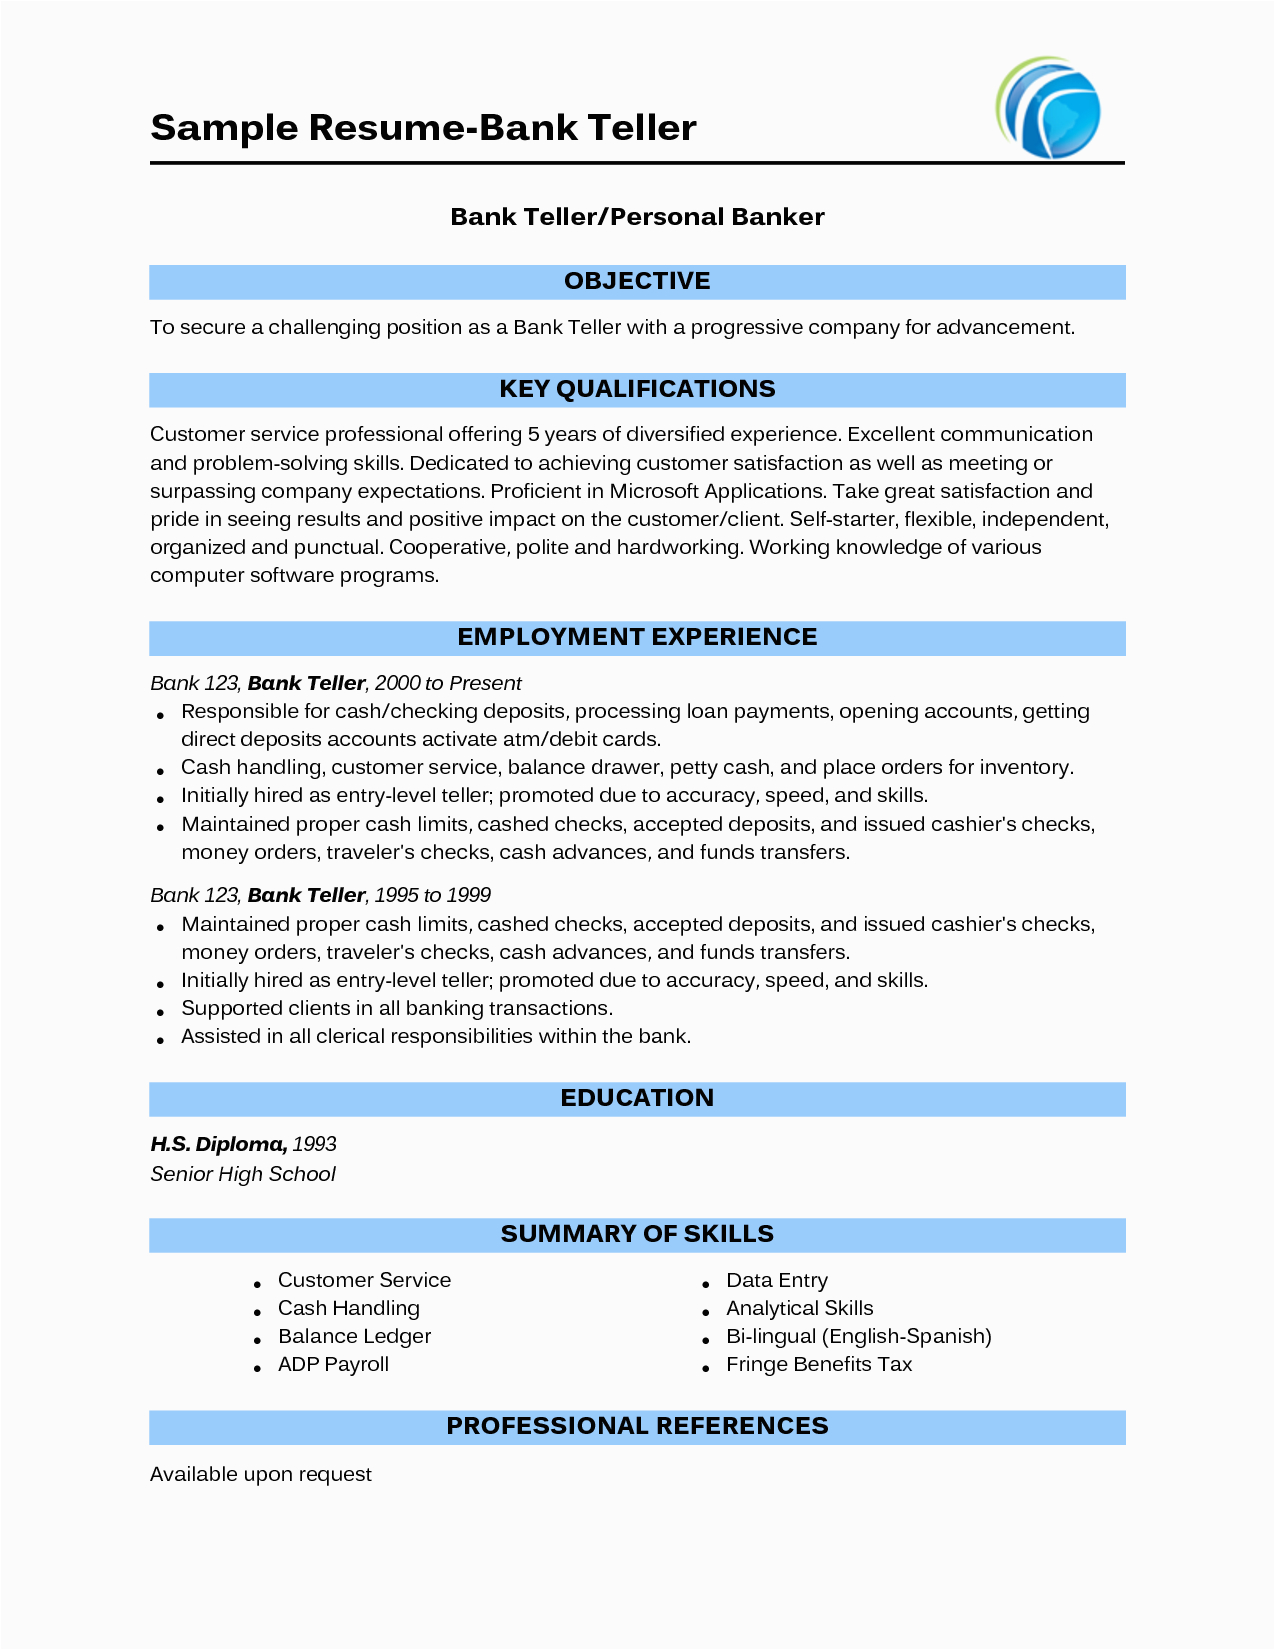 Sample Resume for Bank Jobs with No Experience Teller Resume with No Experience